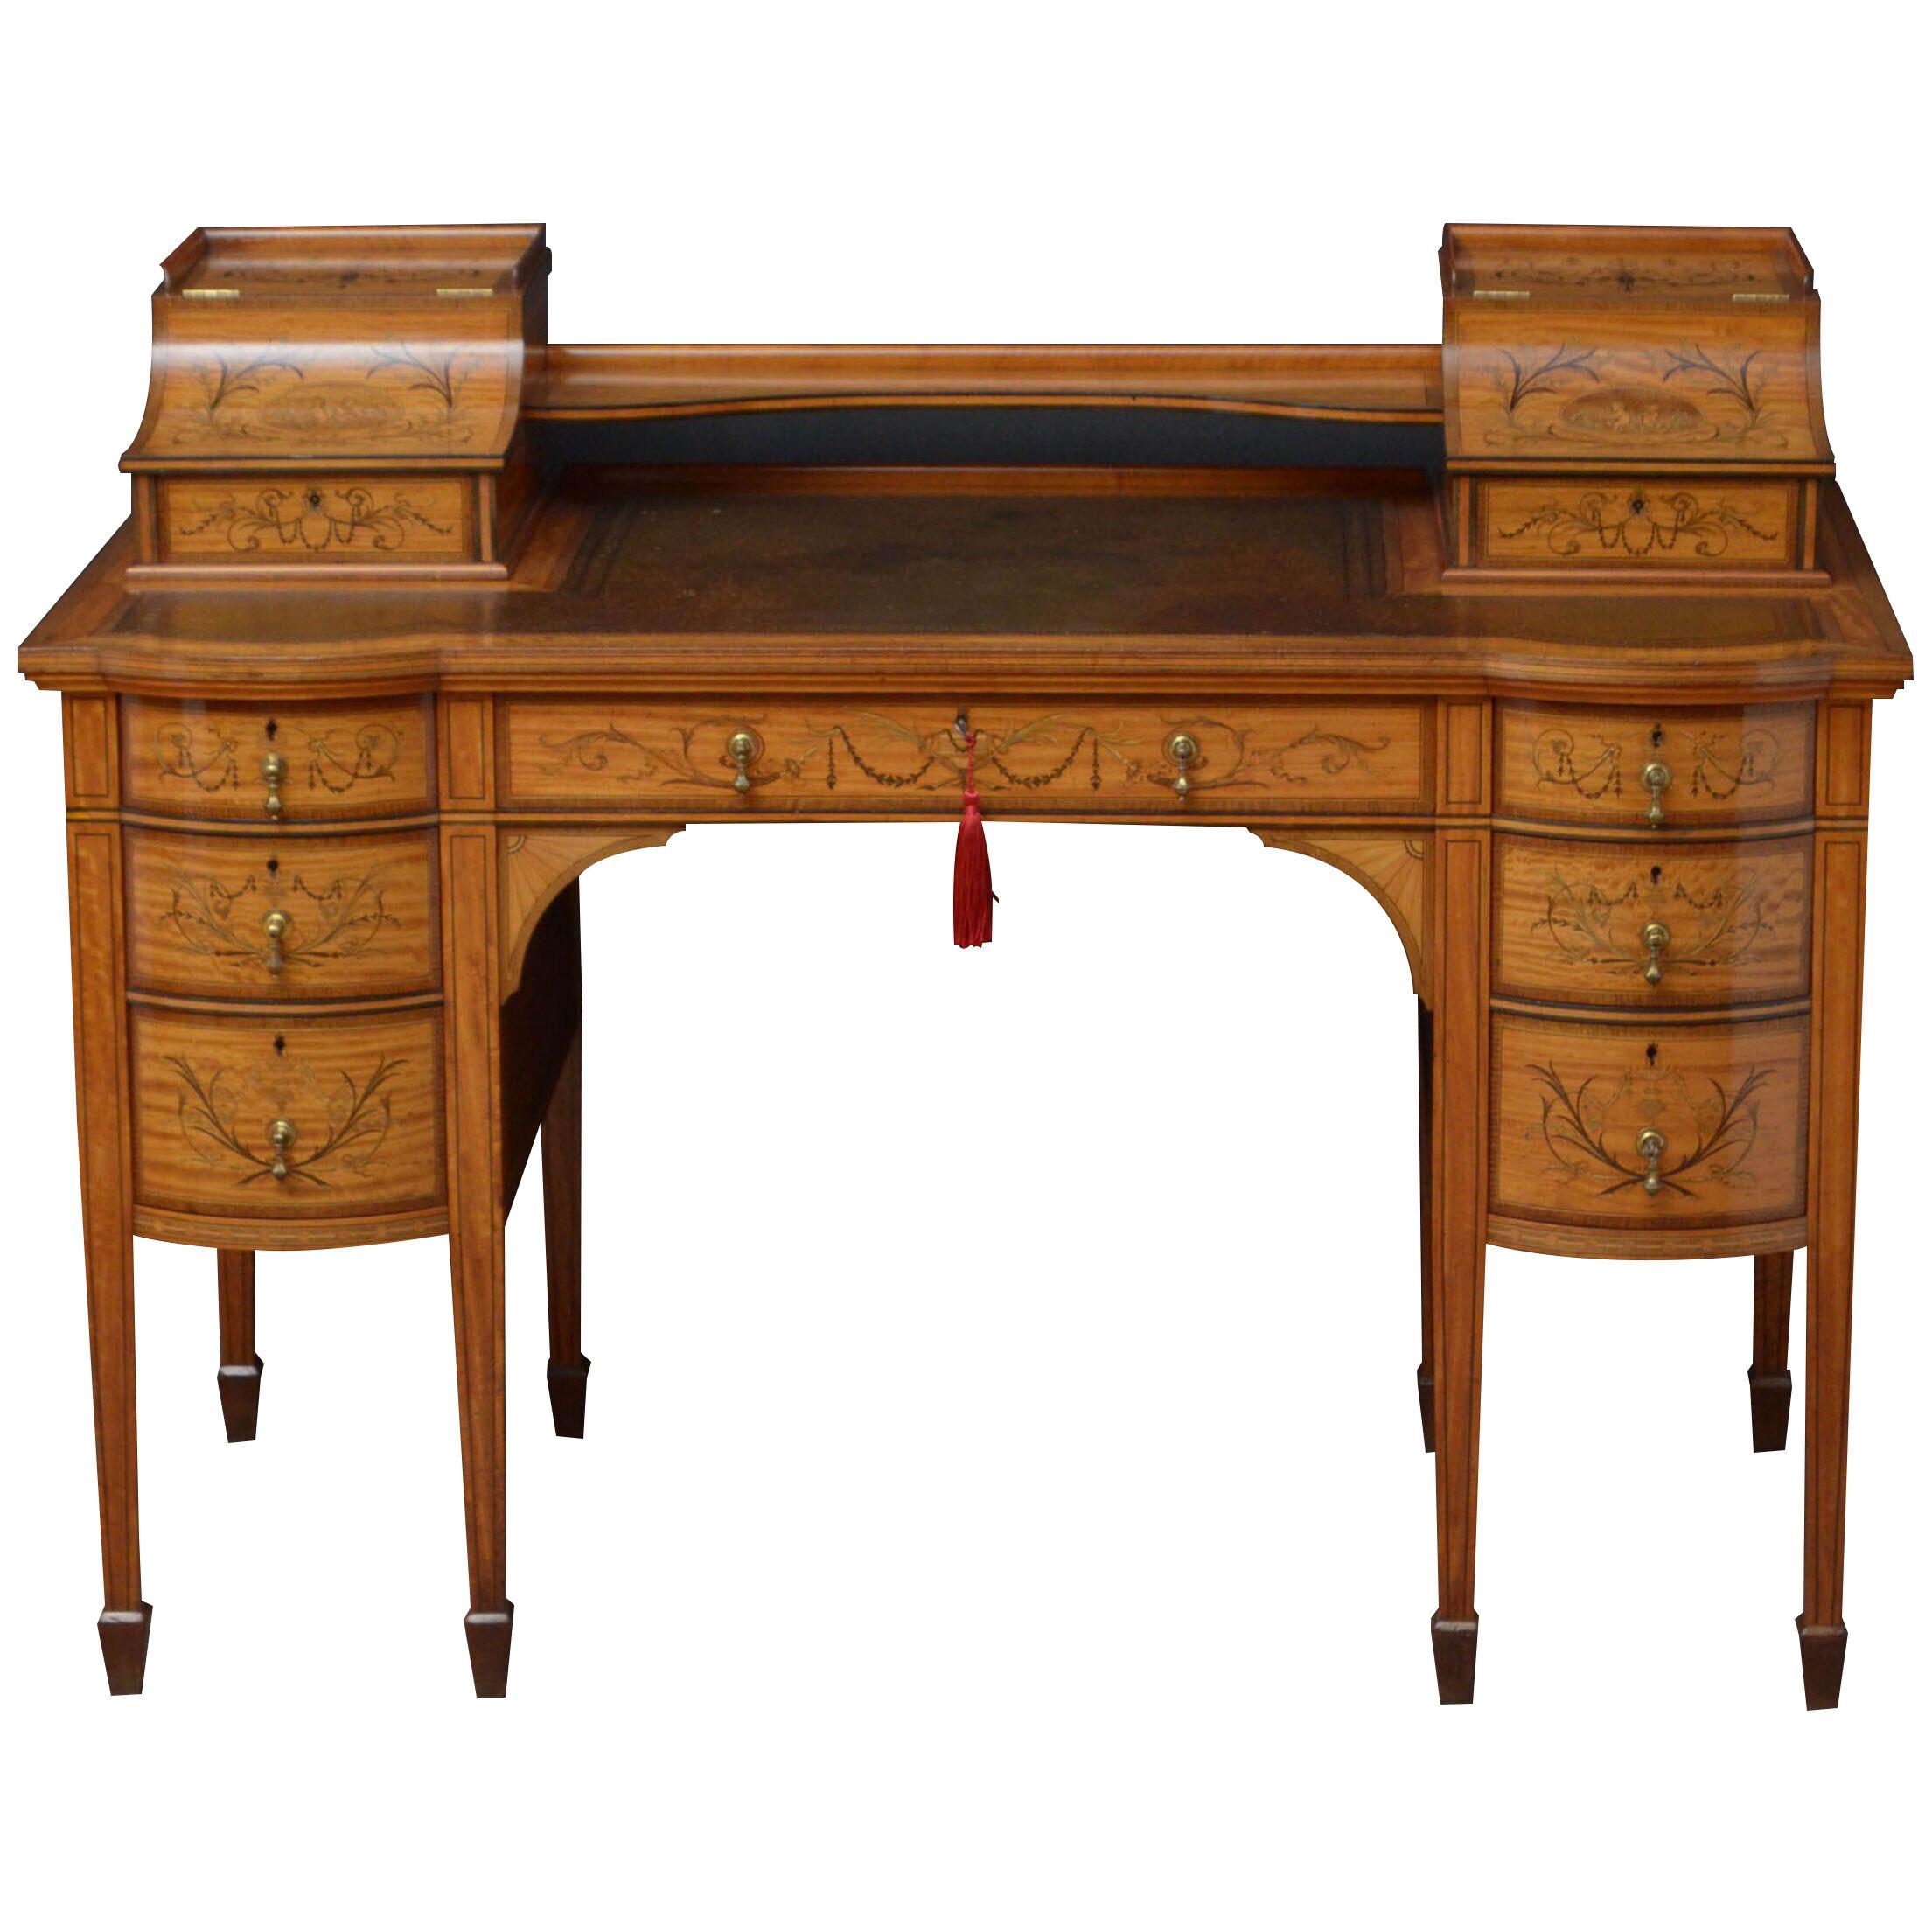 Late Victorian Carlton House Desk in Satinwood